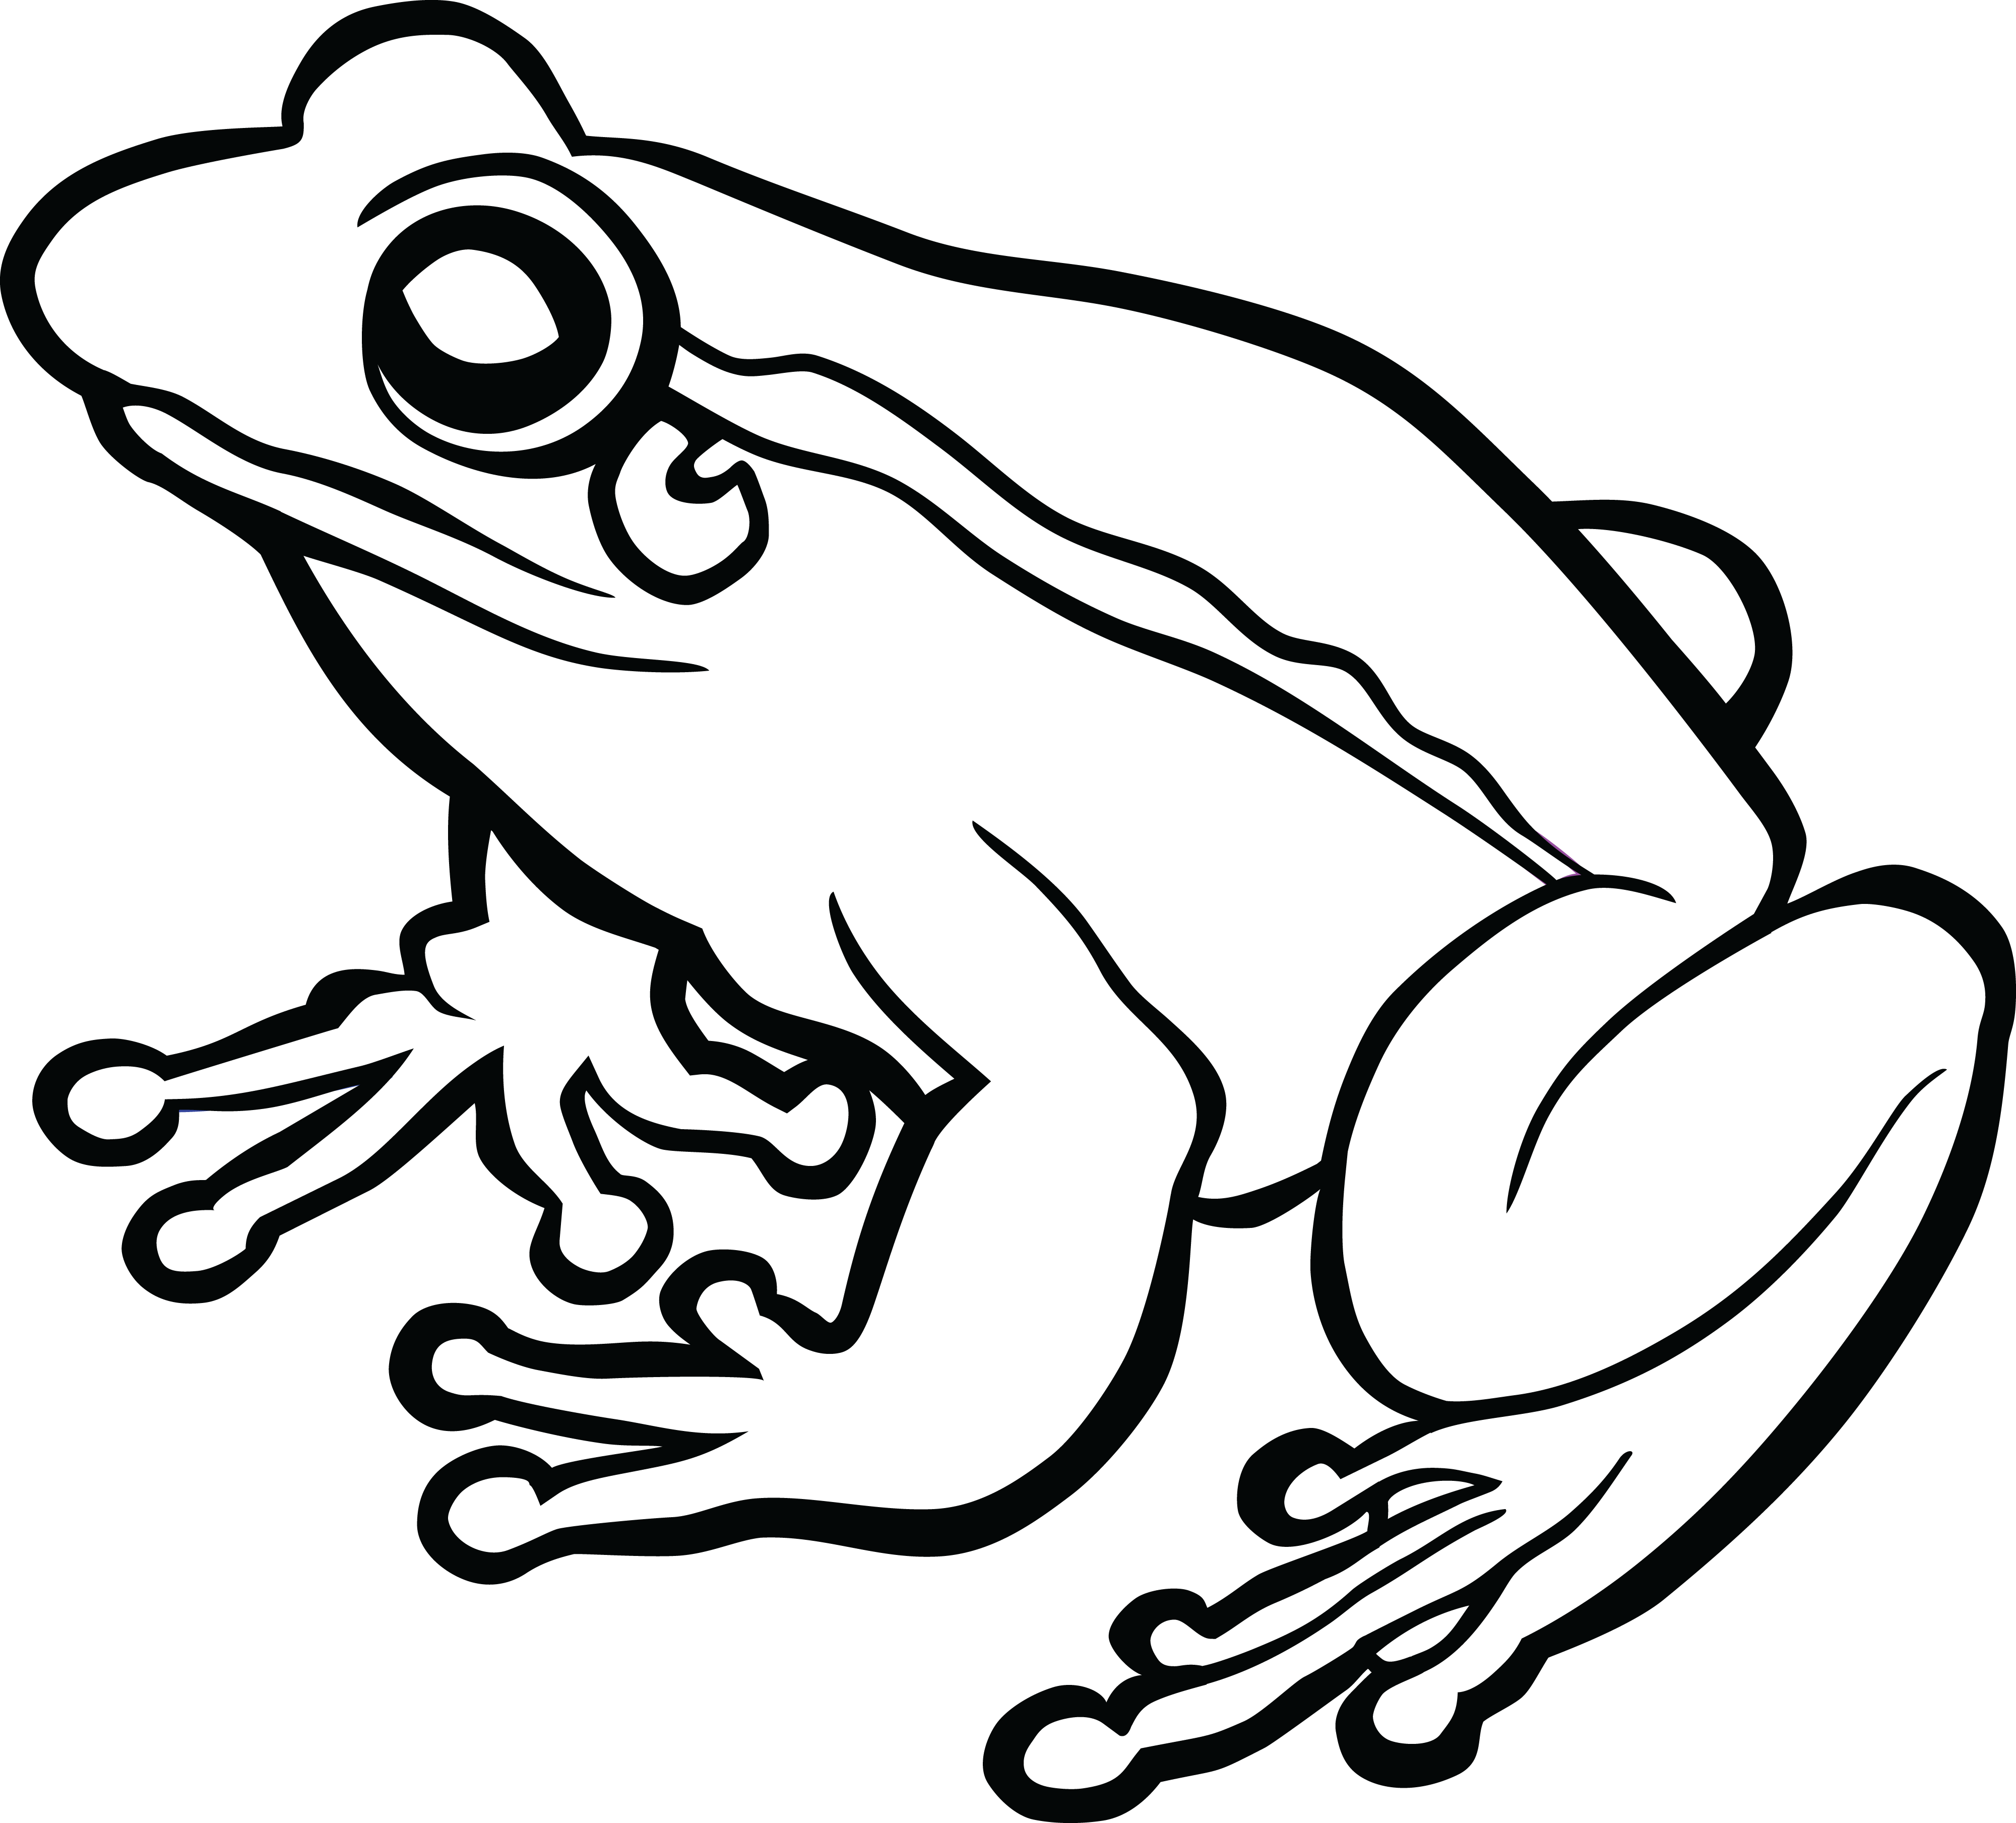 Frog silhouette clip art. Dow